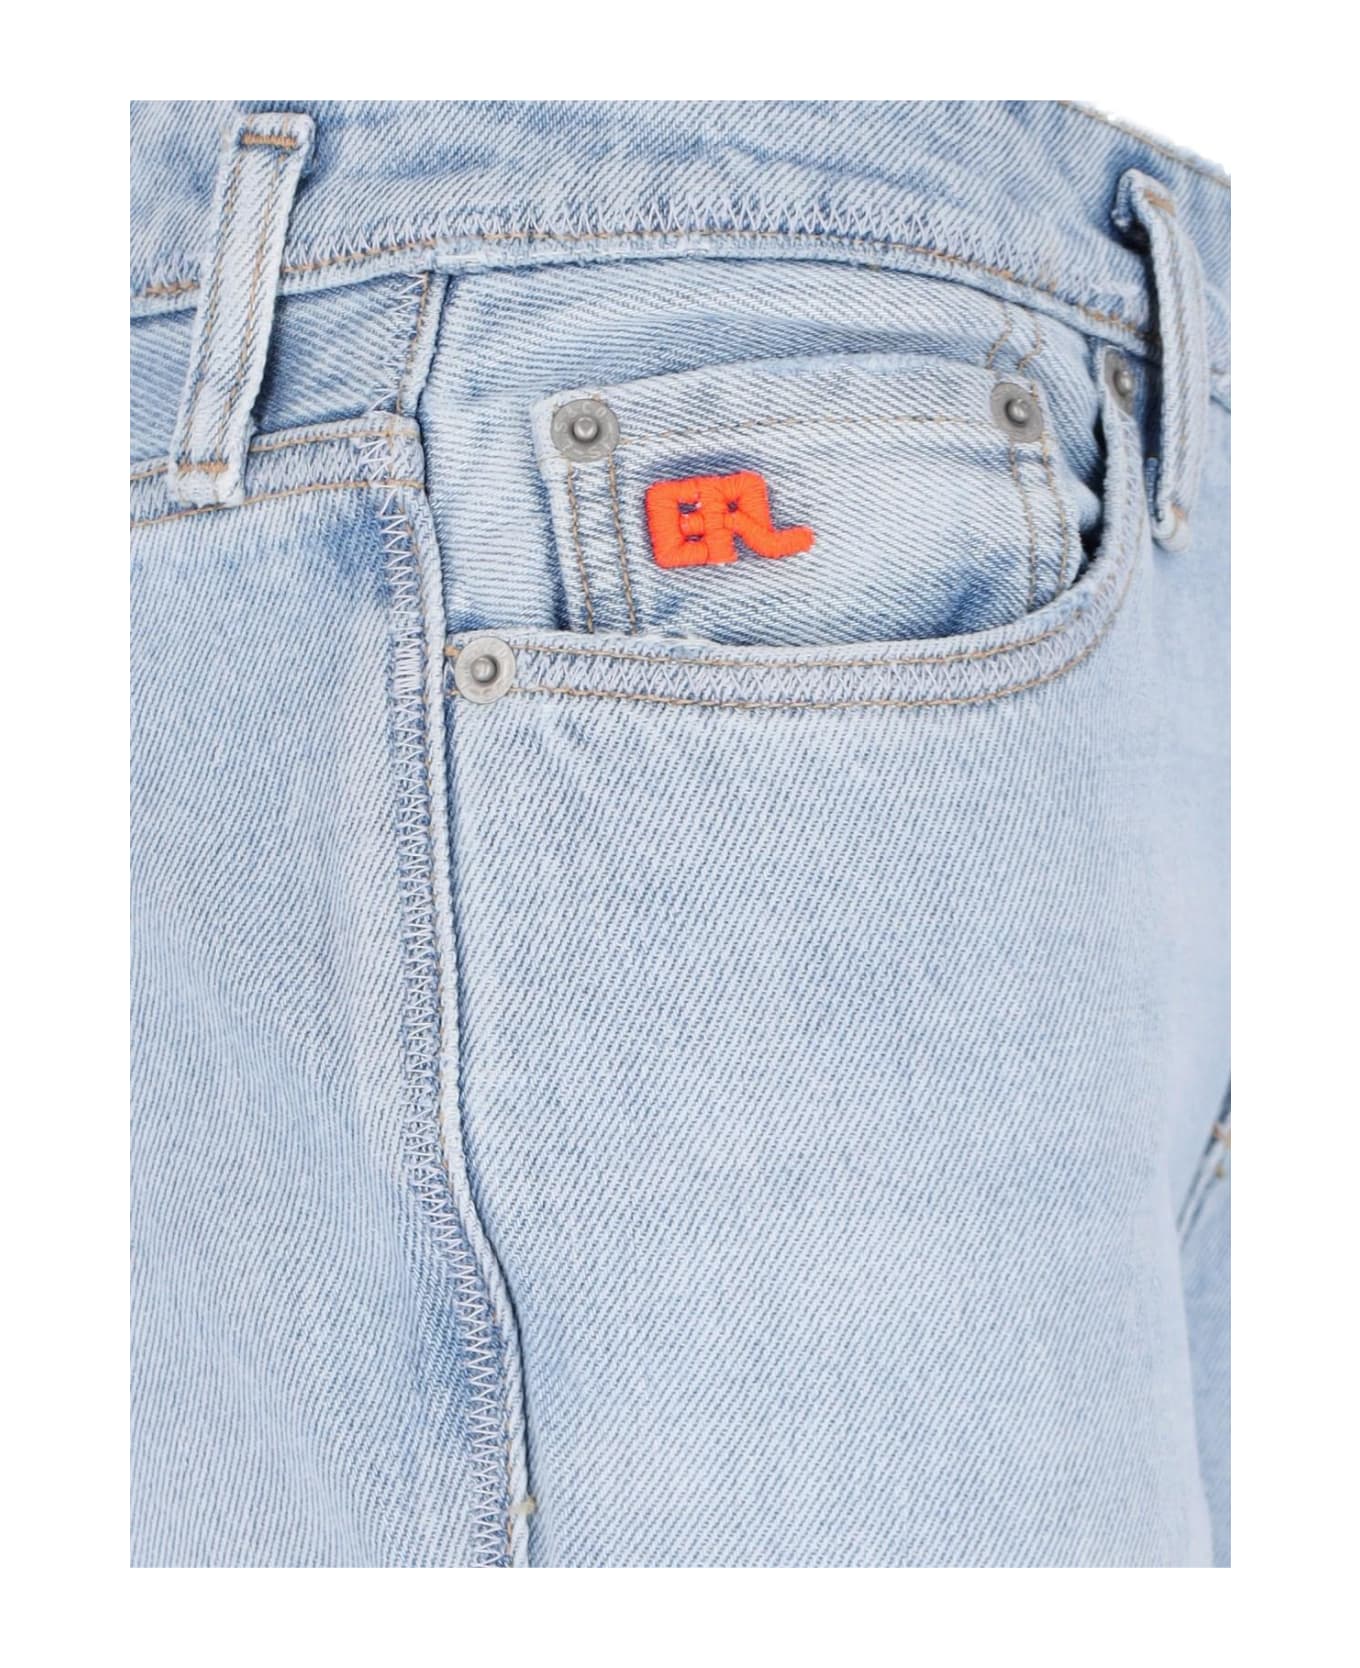 ERL X Levi's Flared Jeans - Blue name:463